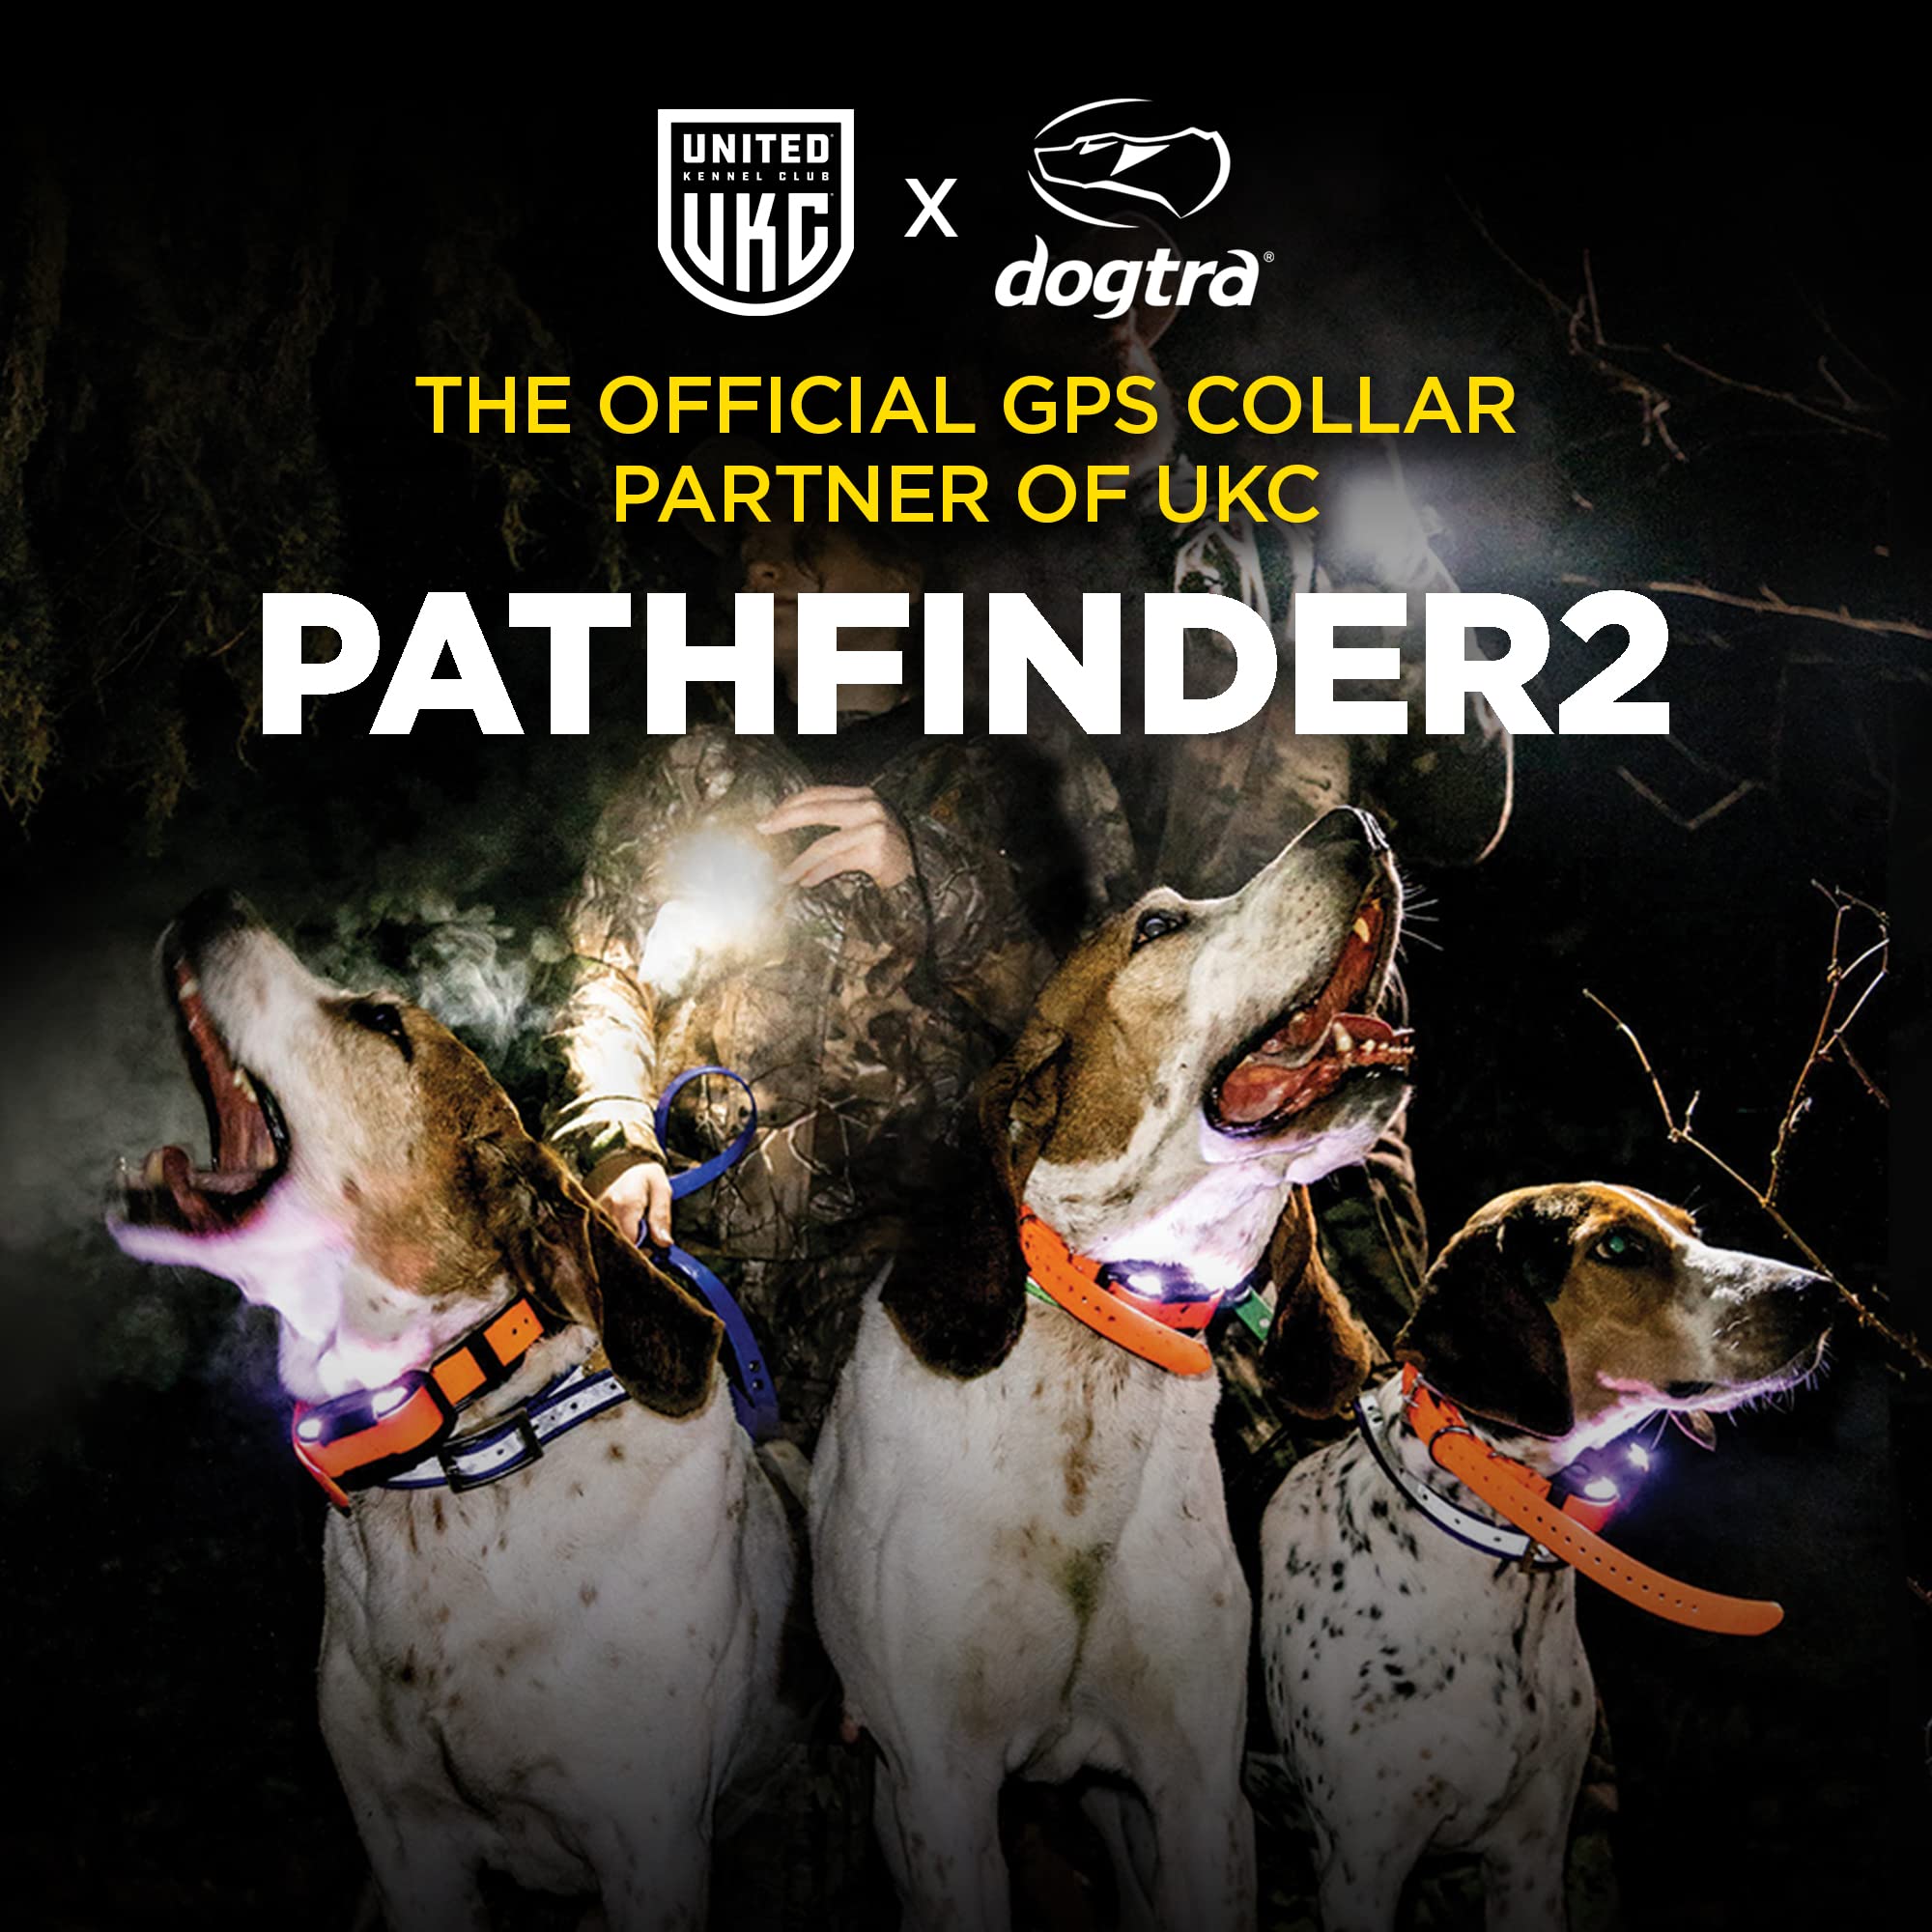 Dogtra 2 Dog Pathfinder 2 GPS Dog Tracker e Collar with PATHFINDER2 Green Add on Receiver LED Light No Monthly fees Free App Waterproof Smartwatch Control Long Range Multiple Dogs Smartphone Required